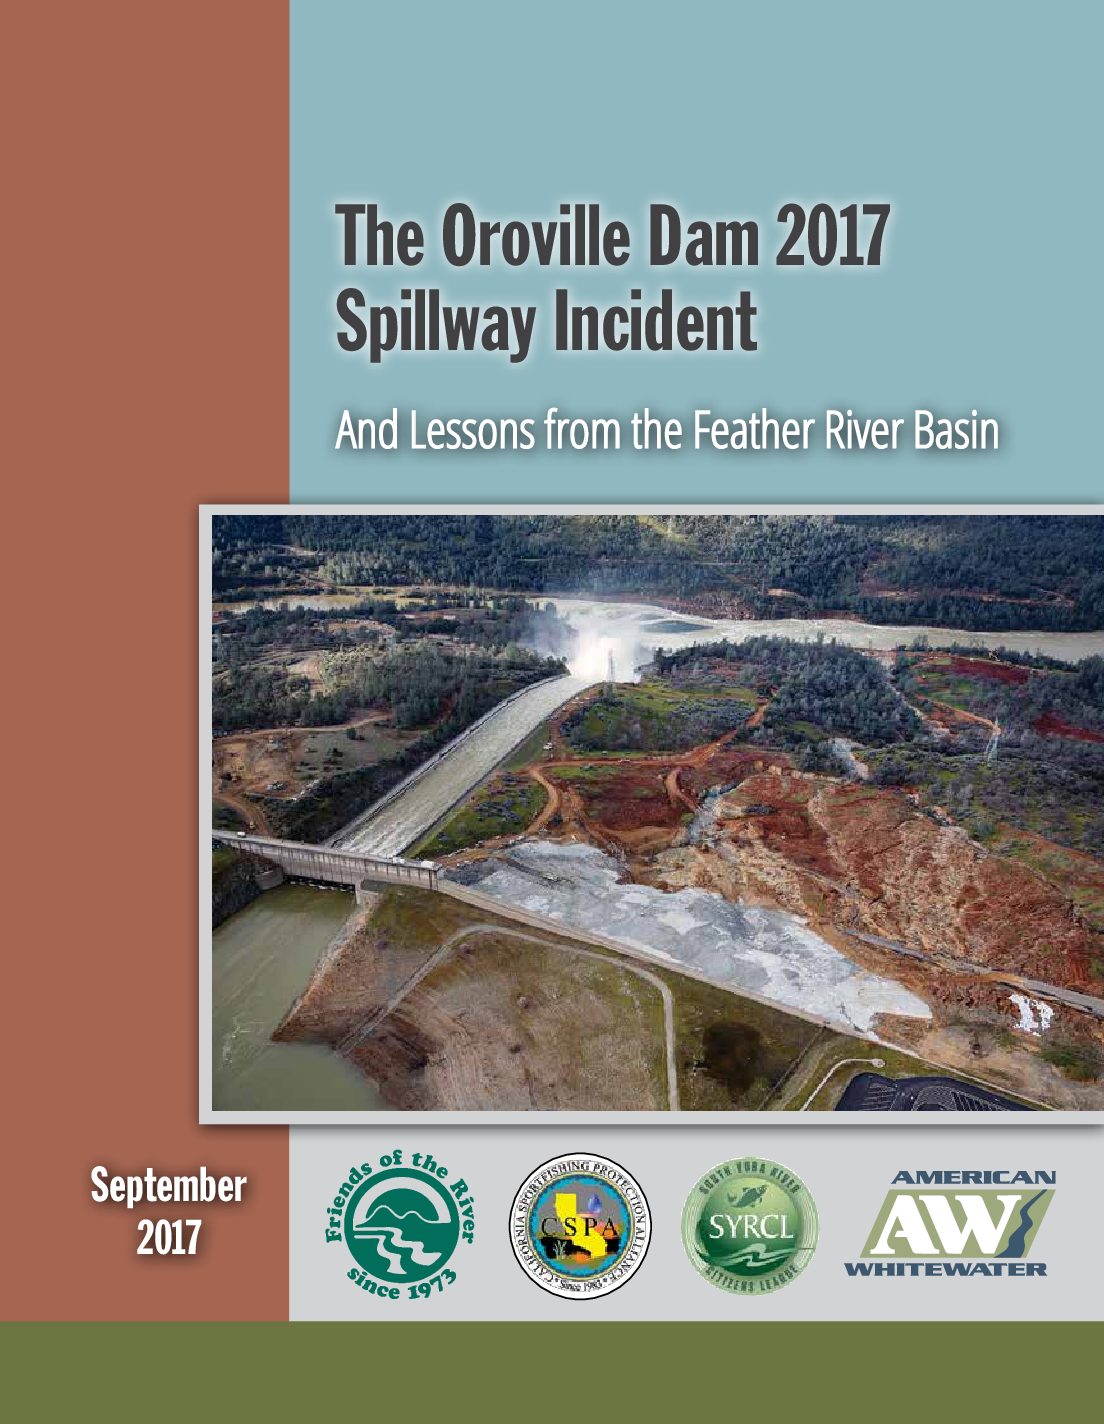 The Oroville Dam 2017 Spillway Incident: Lessons from the Feather River Basin